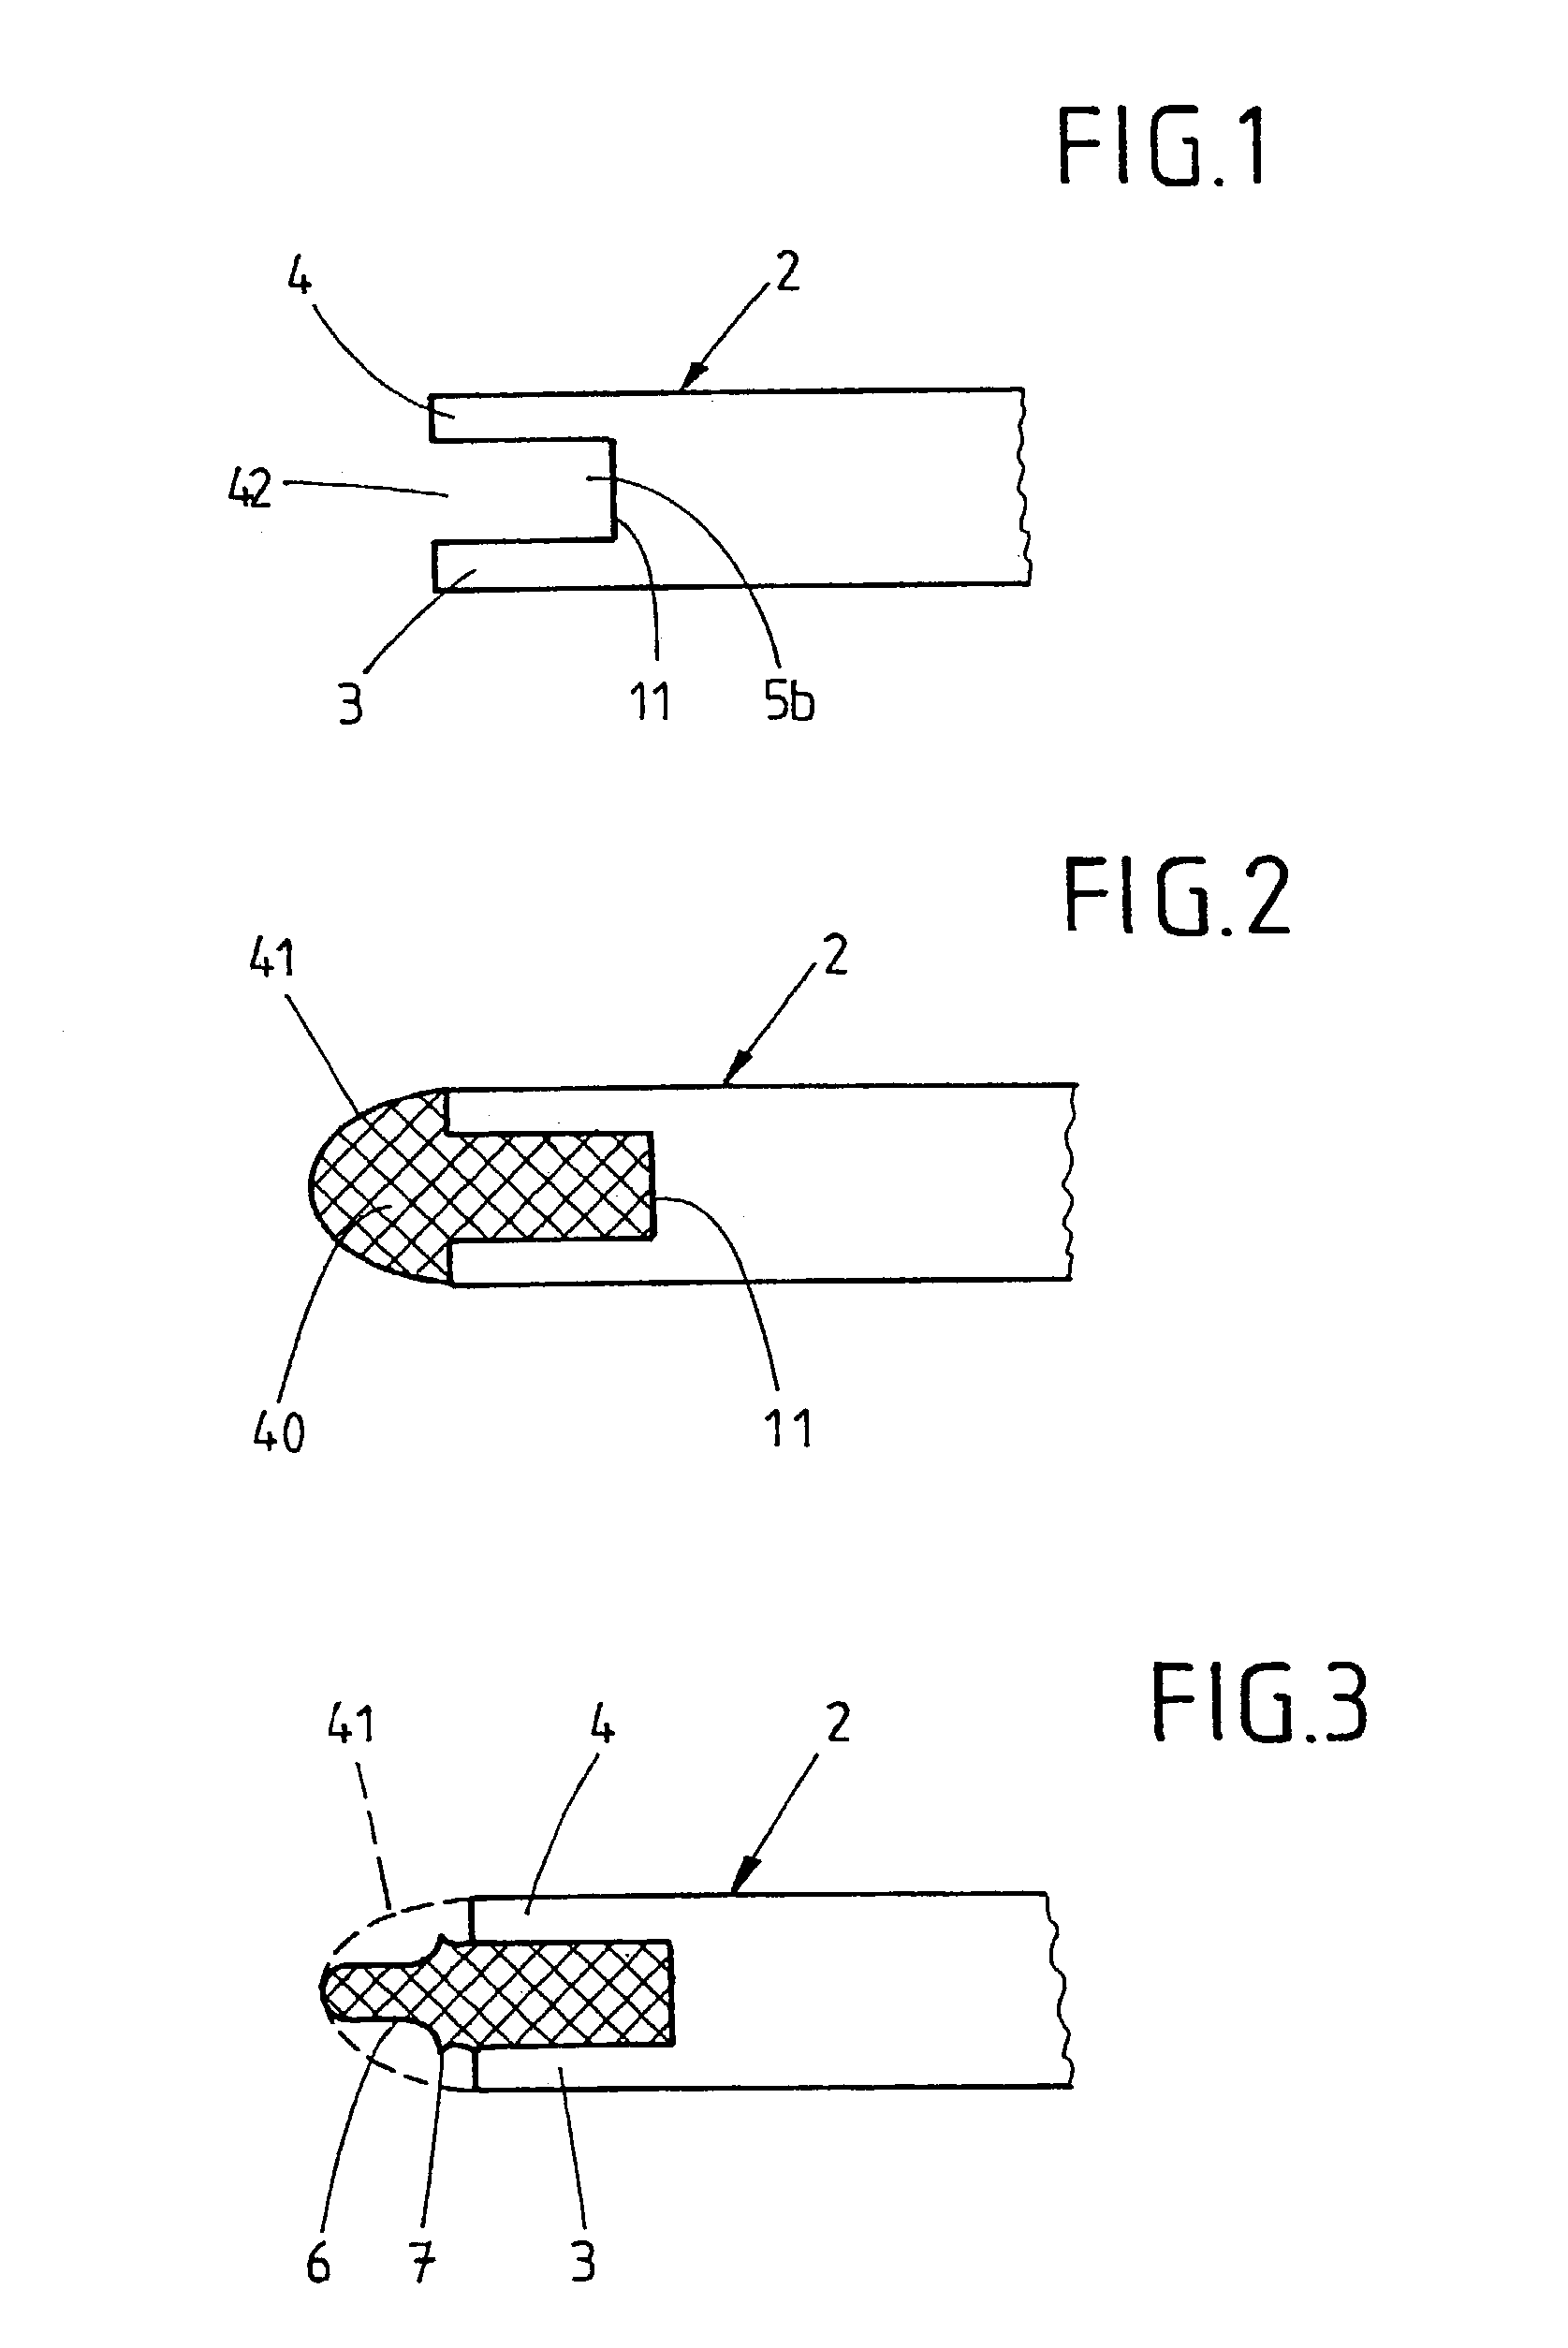 Arrangement of building elements with connecting means